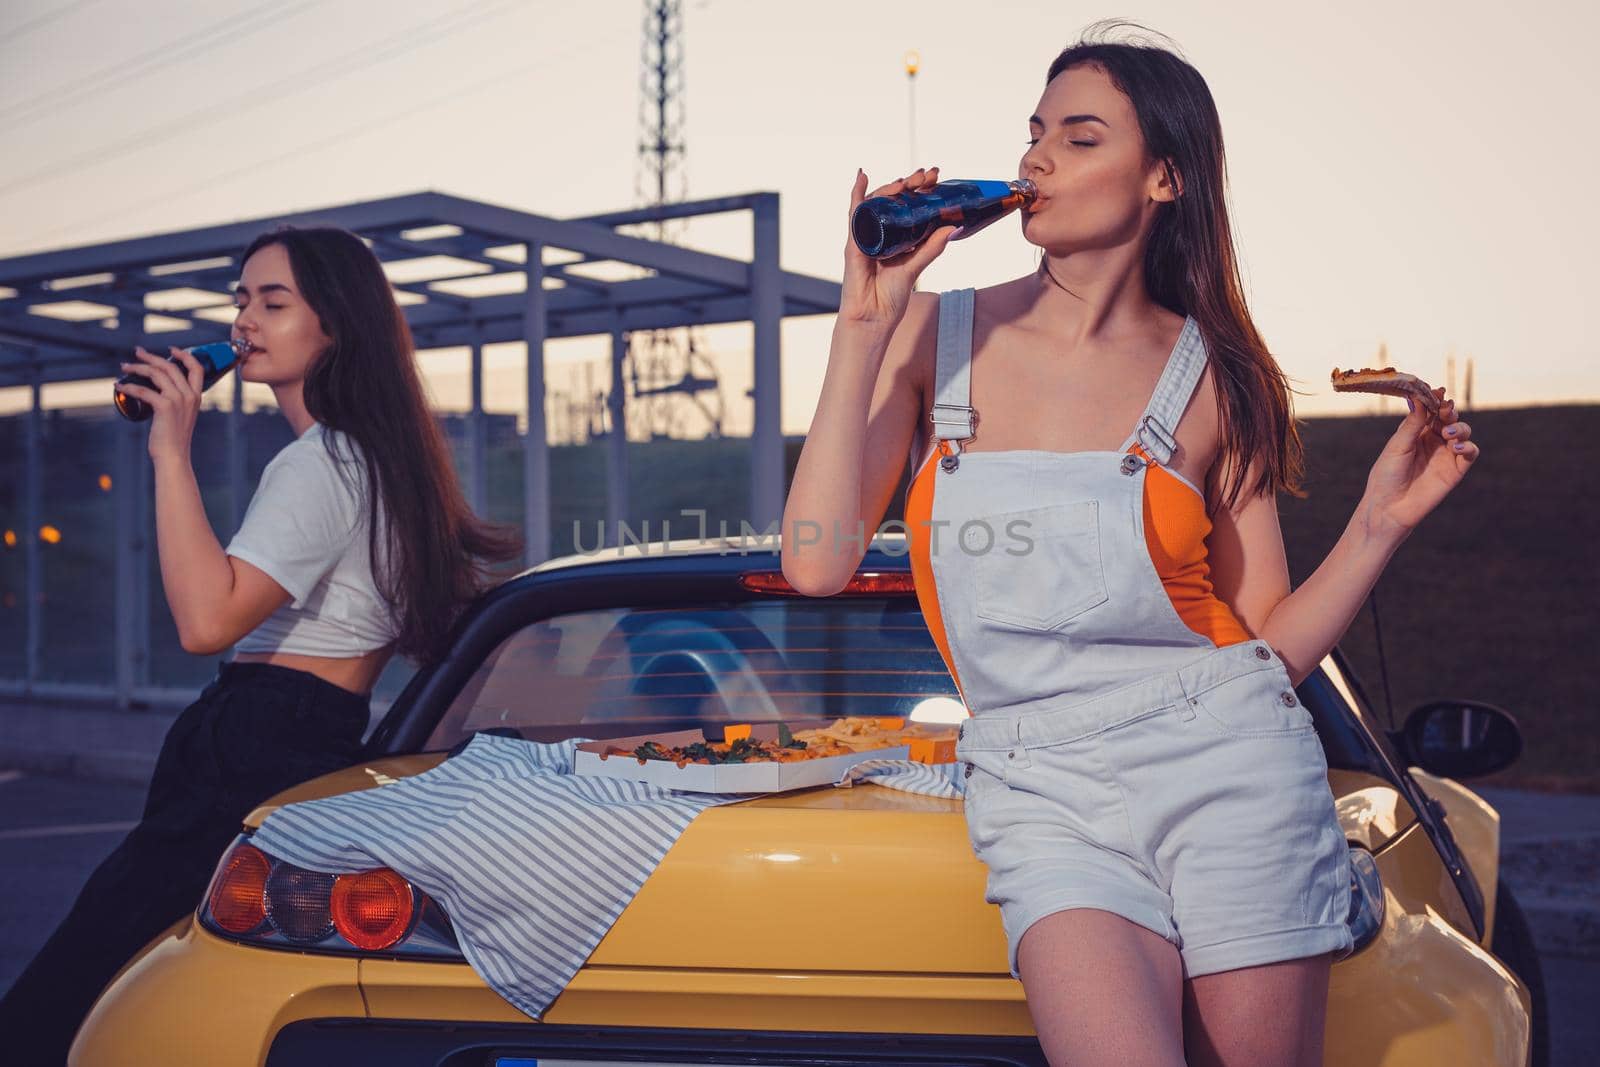 Attractive females in casual outfit are drinking carbonated beverage in glass bottles, eating pizza, posing near yellow car on parking lot. Fast food. Summer evening. Close up, copy space, mock up